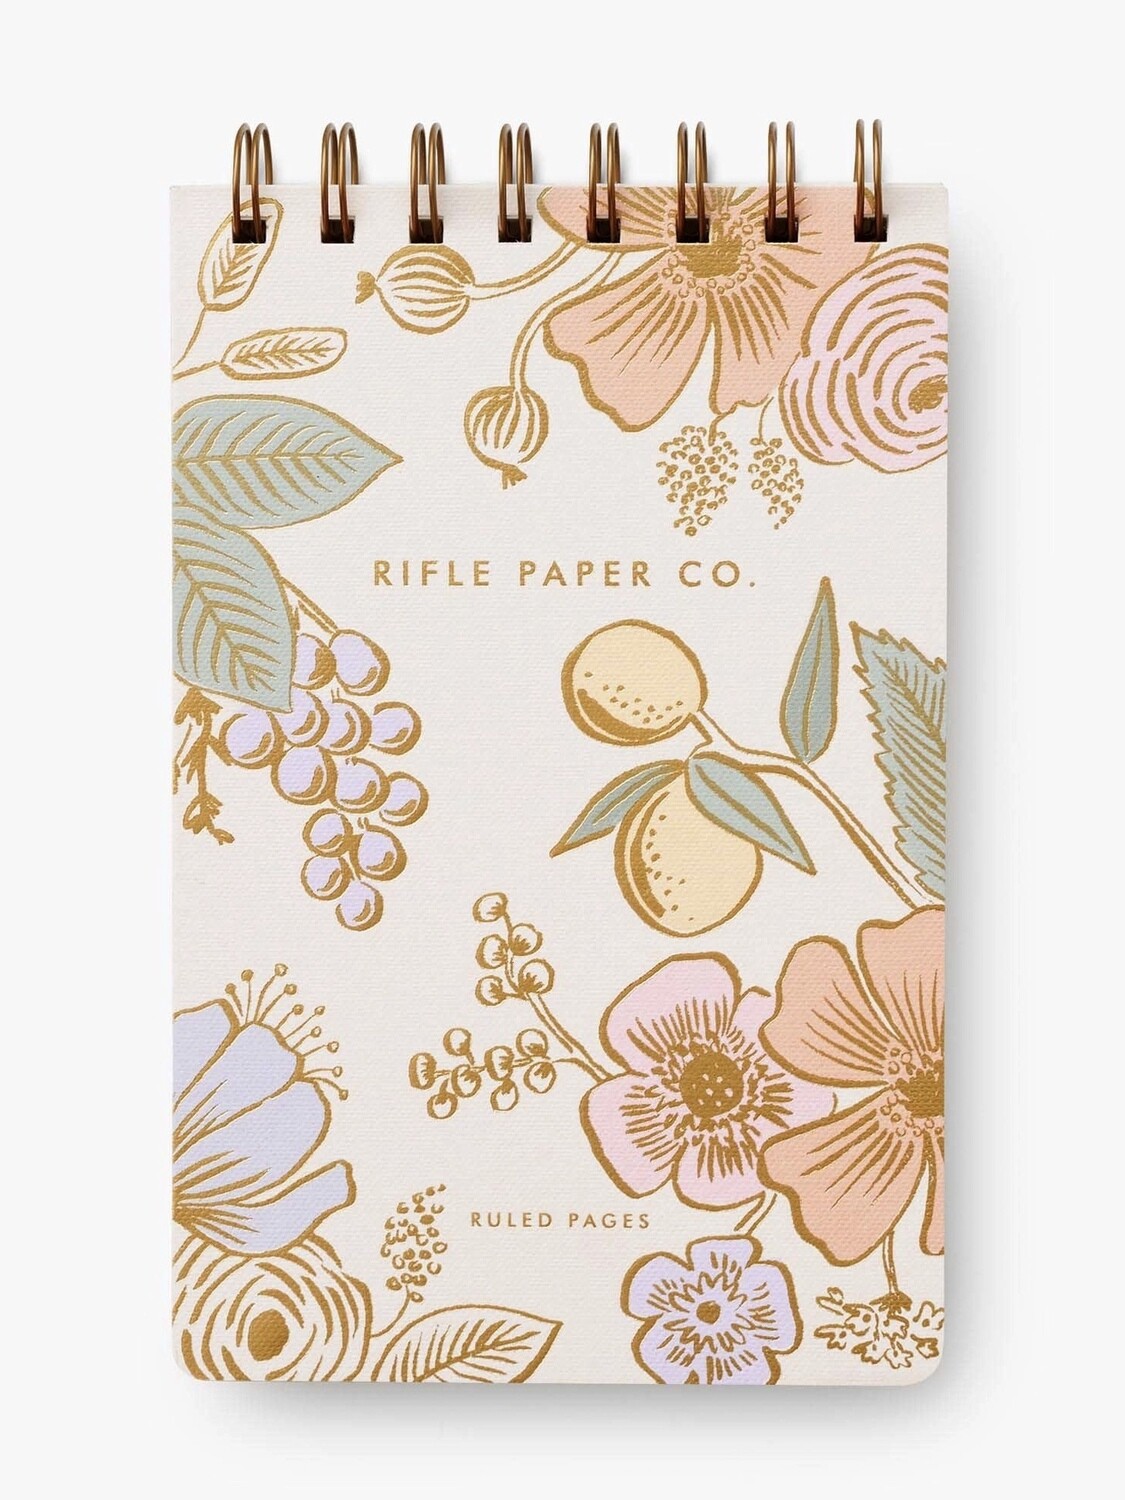 Colette Small Top Spiral Notebook - Rifle Paper Co. RPC93